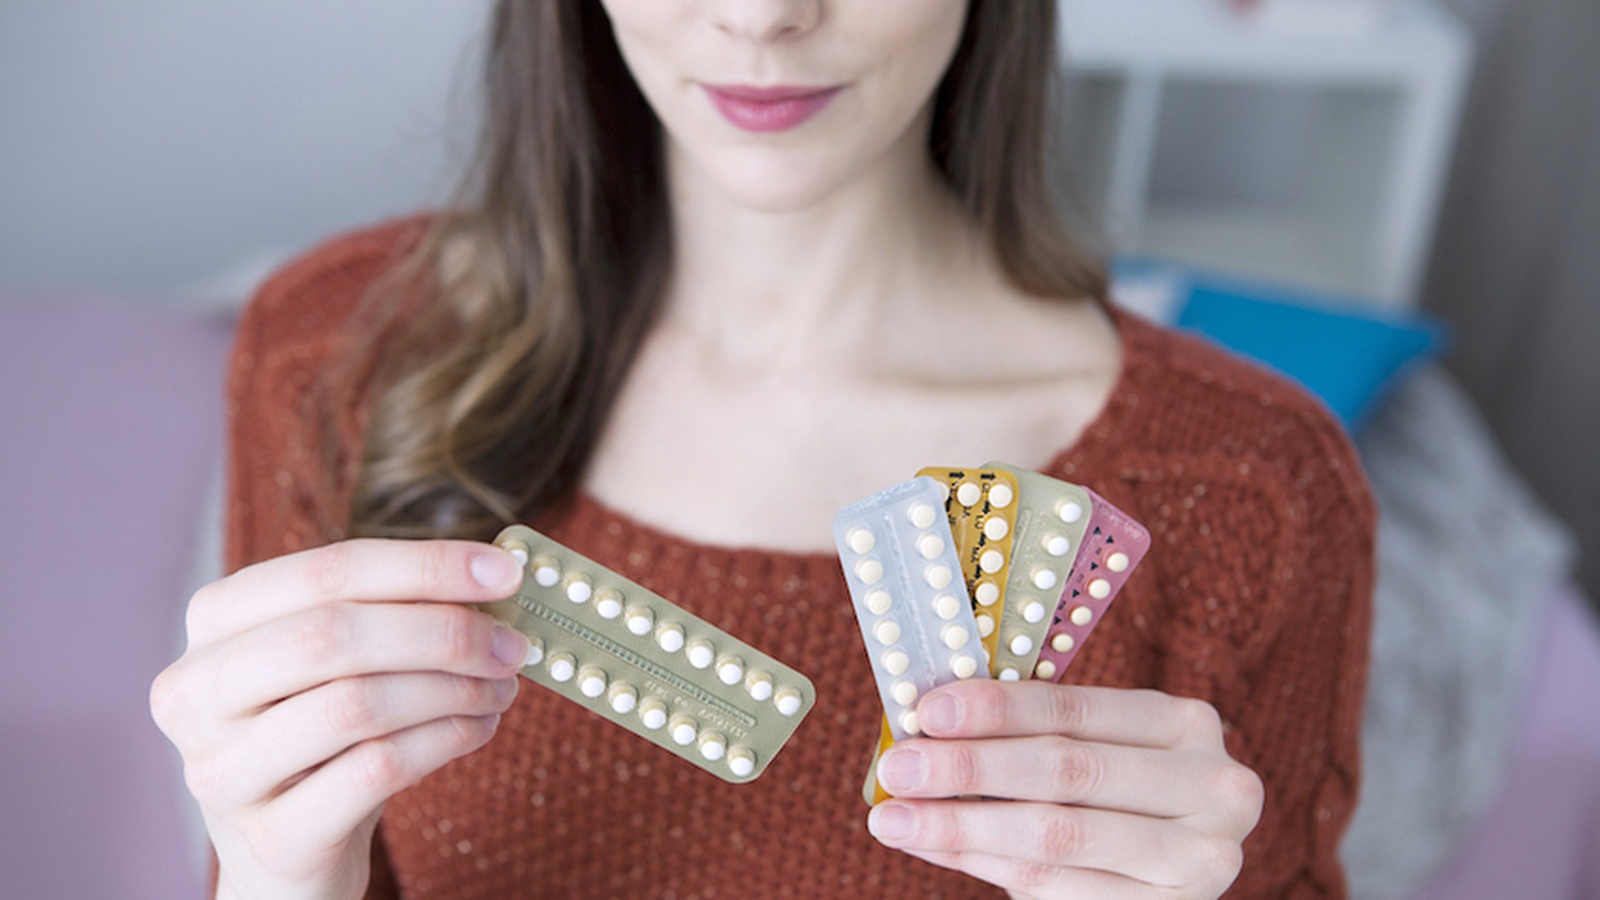 Depressed? New Study Shows The Pill Could Be To Blame